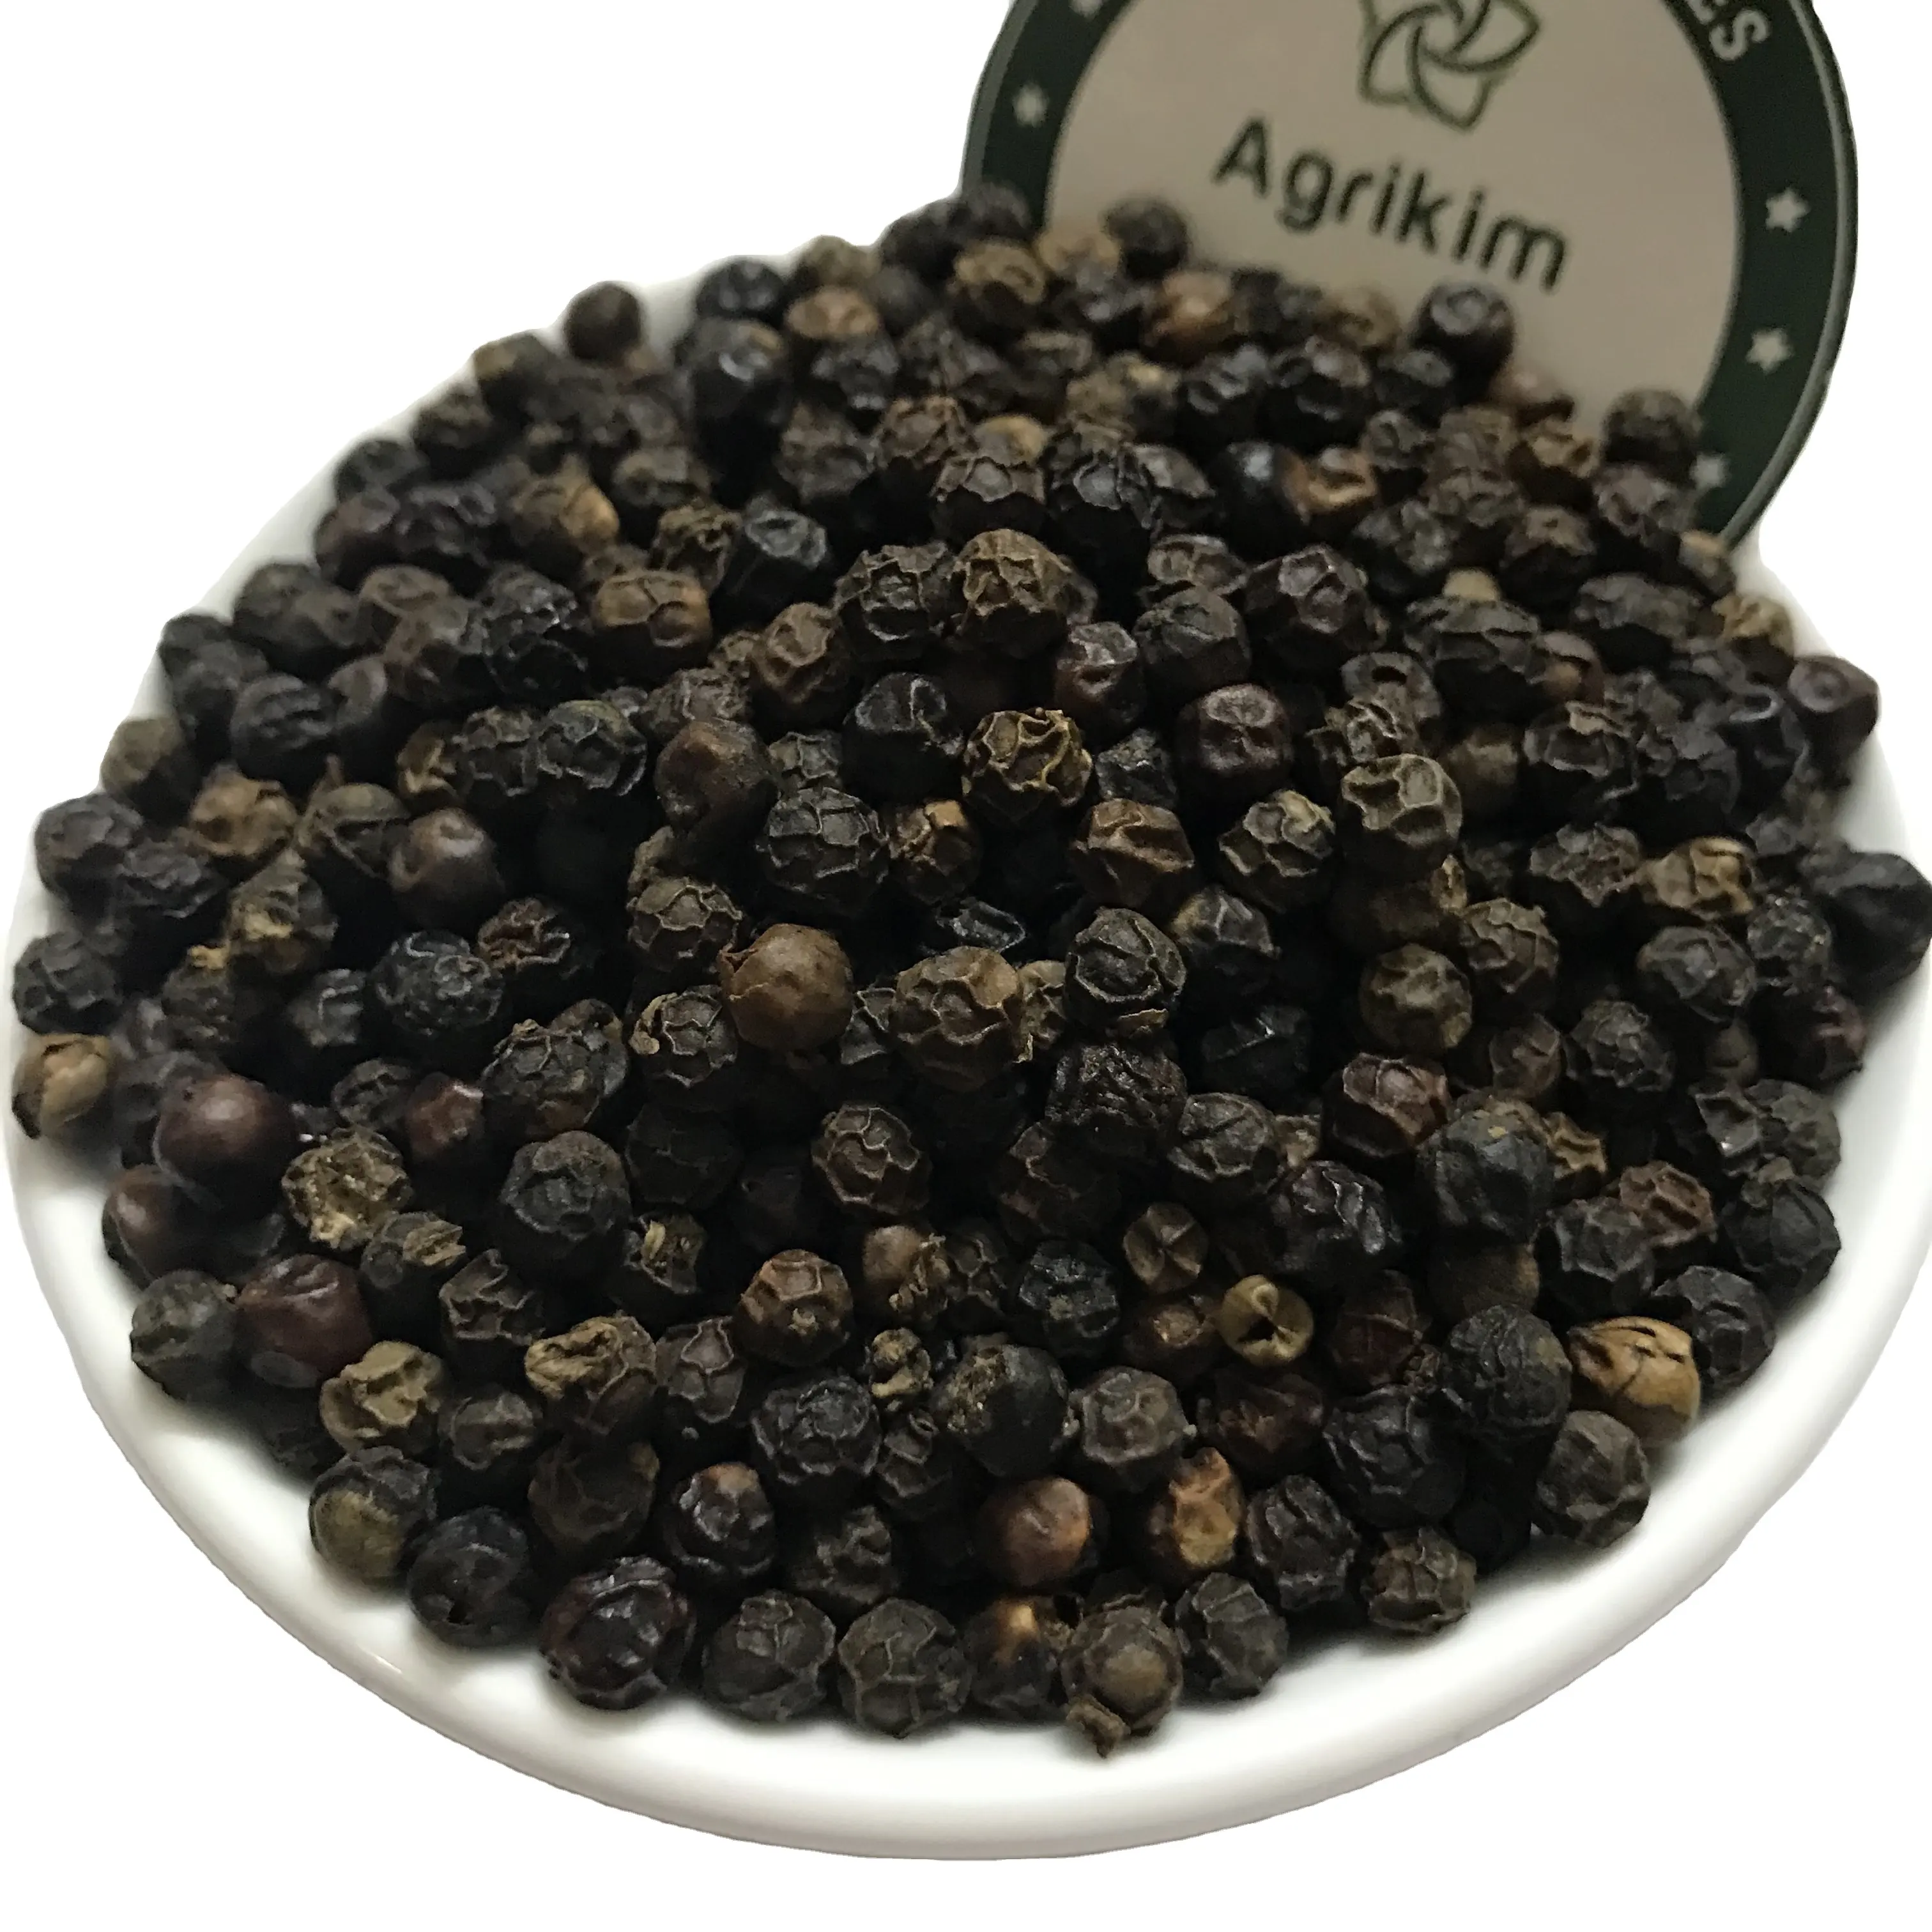 Low Price High Quality Black Pepper 5mm 500 FAQ 500 MC 550 MC Cheap Price from Reliable Supplier from Vietnam +84368591192